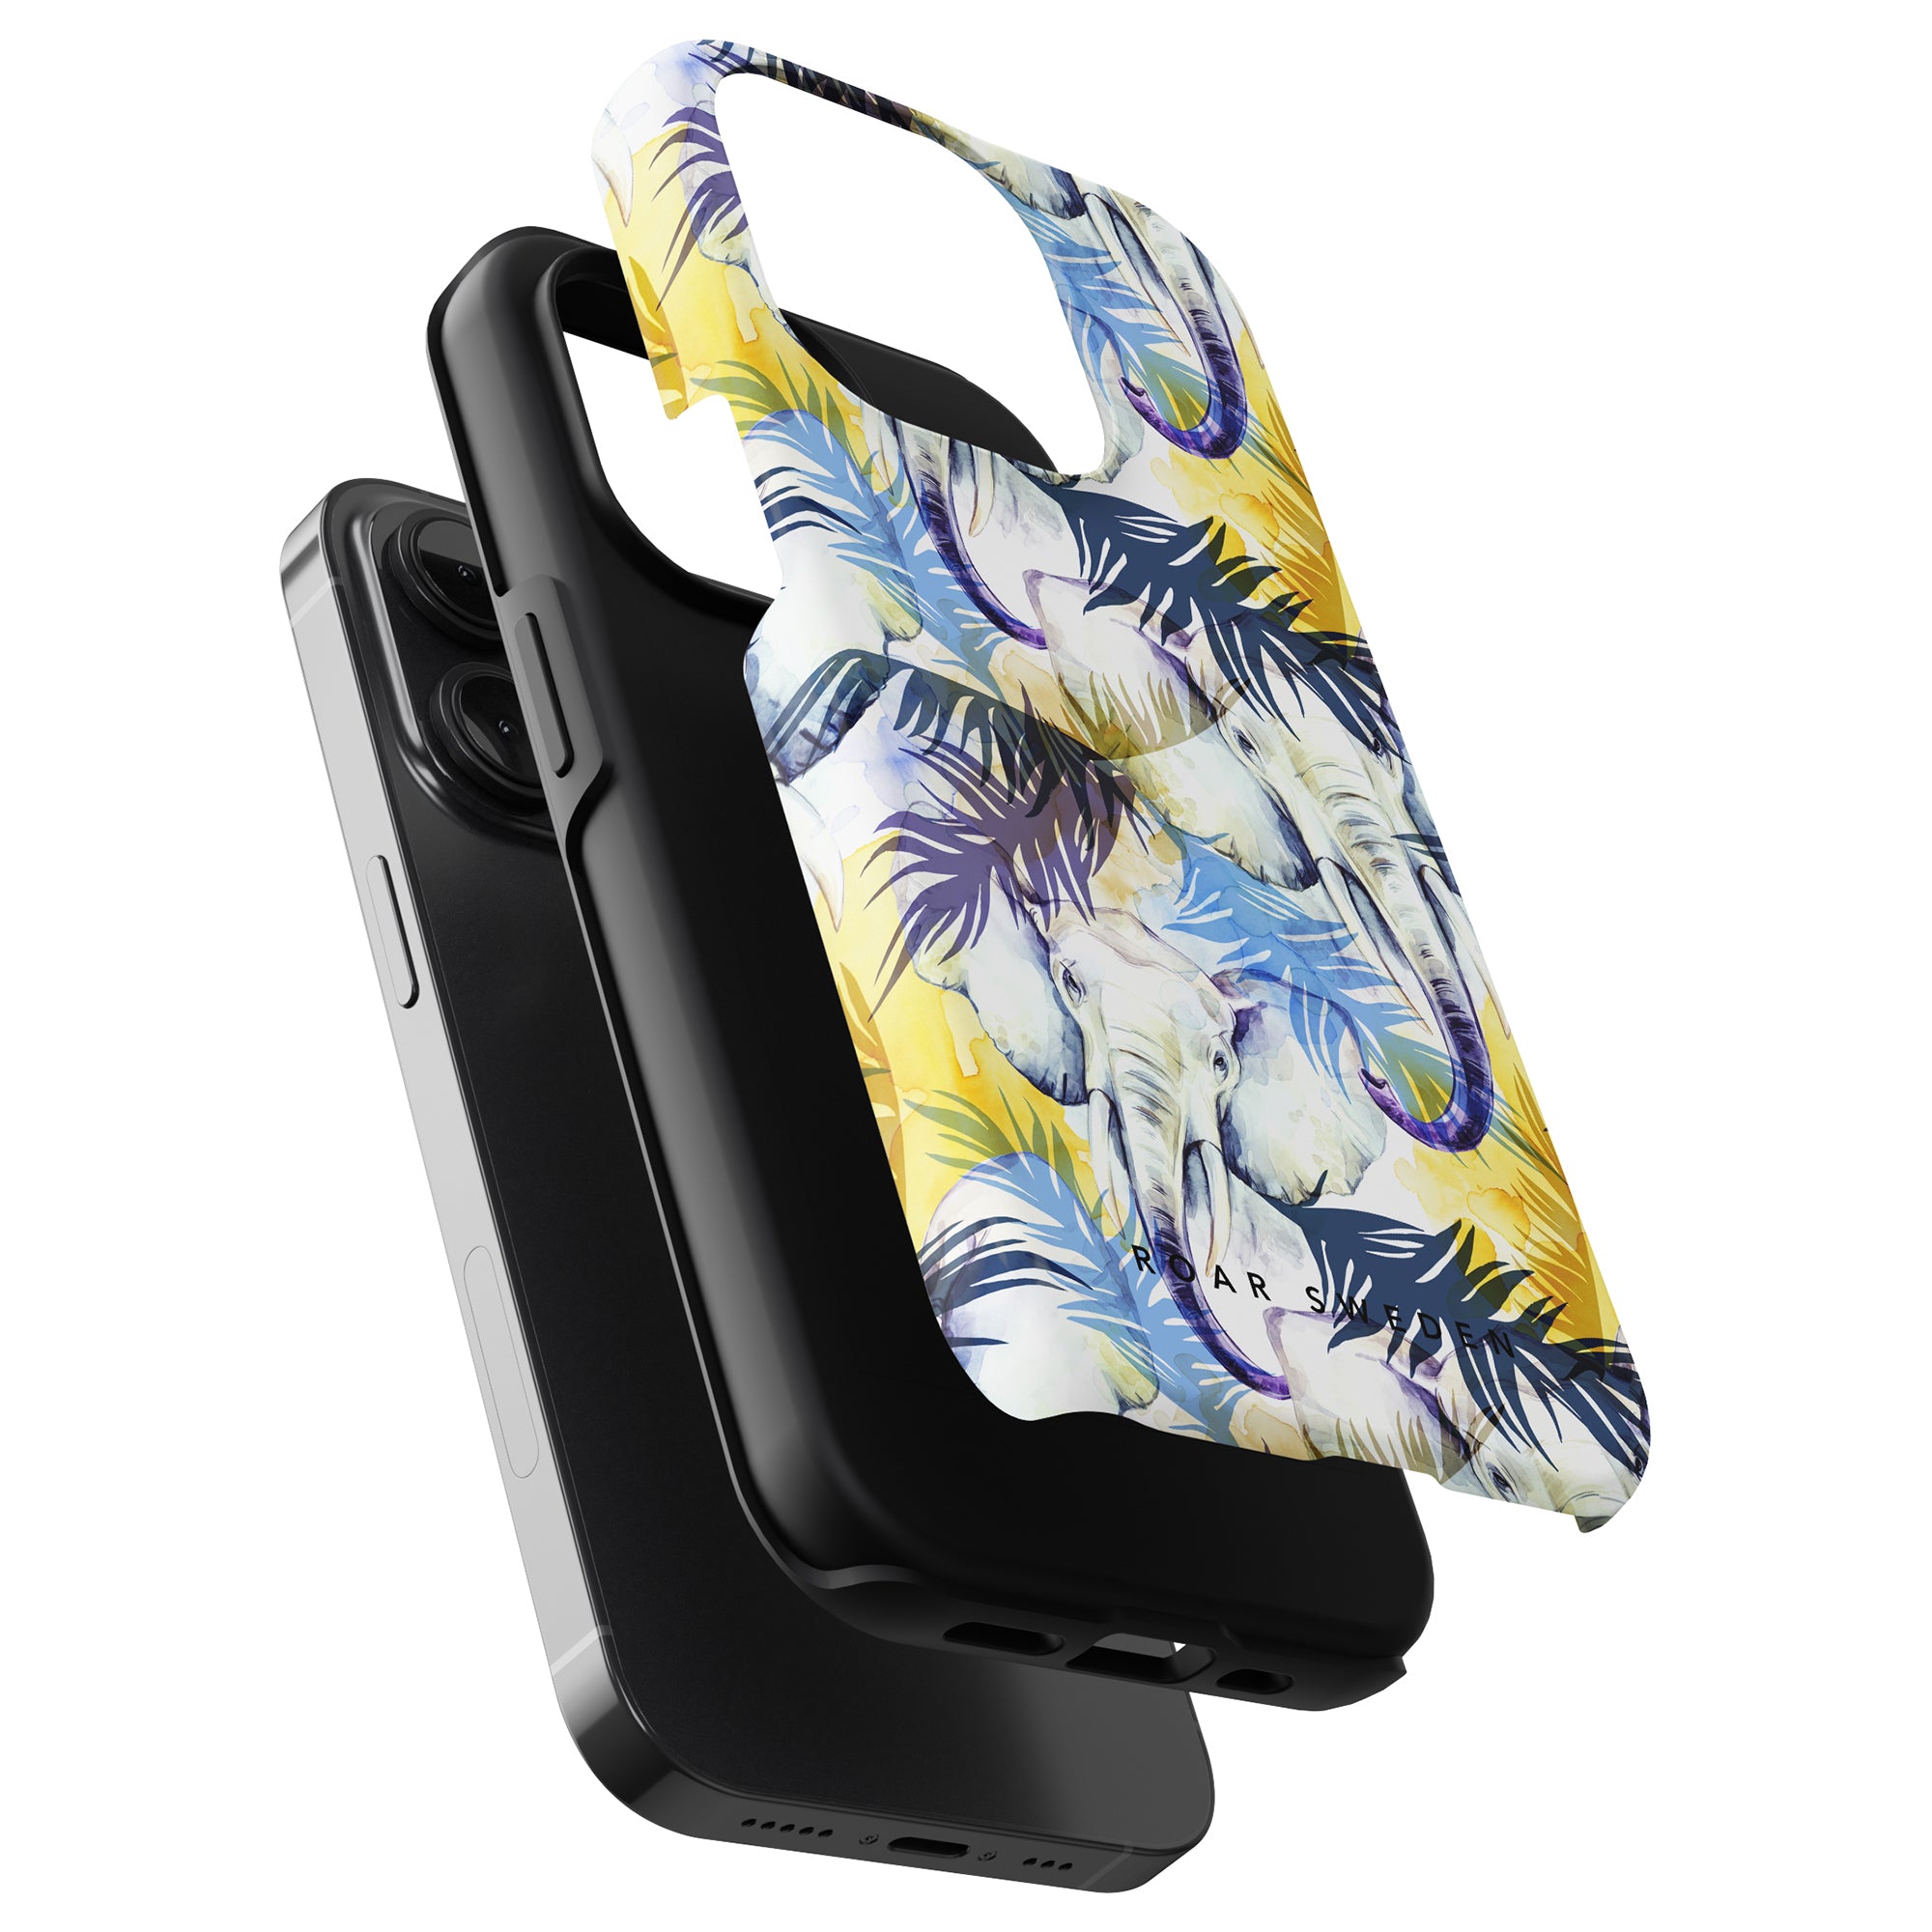 A smartphone with a black Gaja - Tough Case attached to a colorful strap with a tropical leaf pattern.